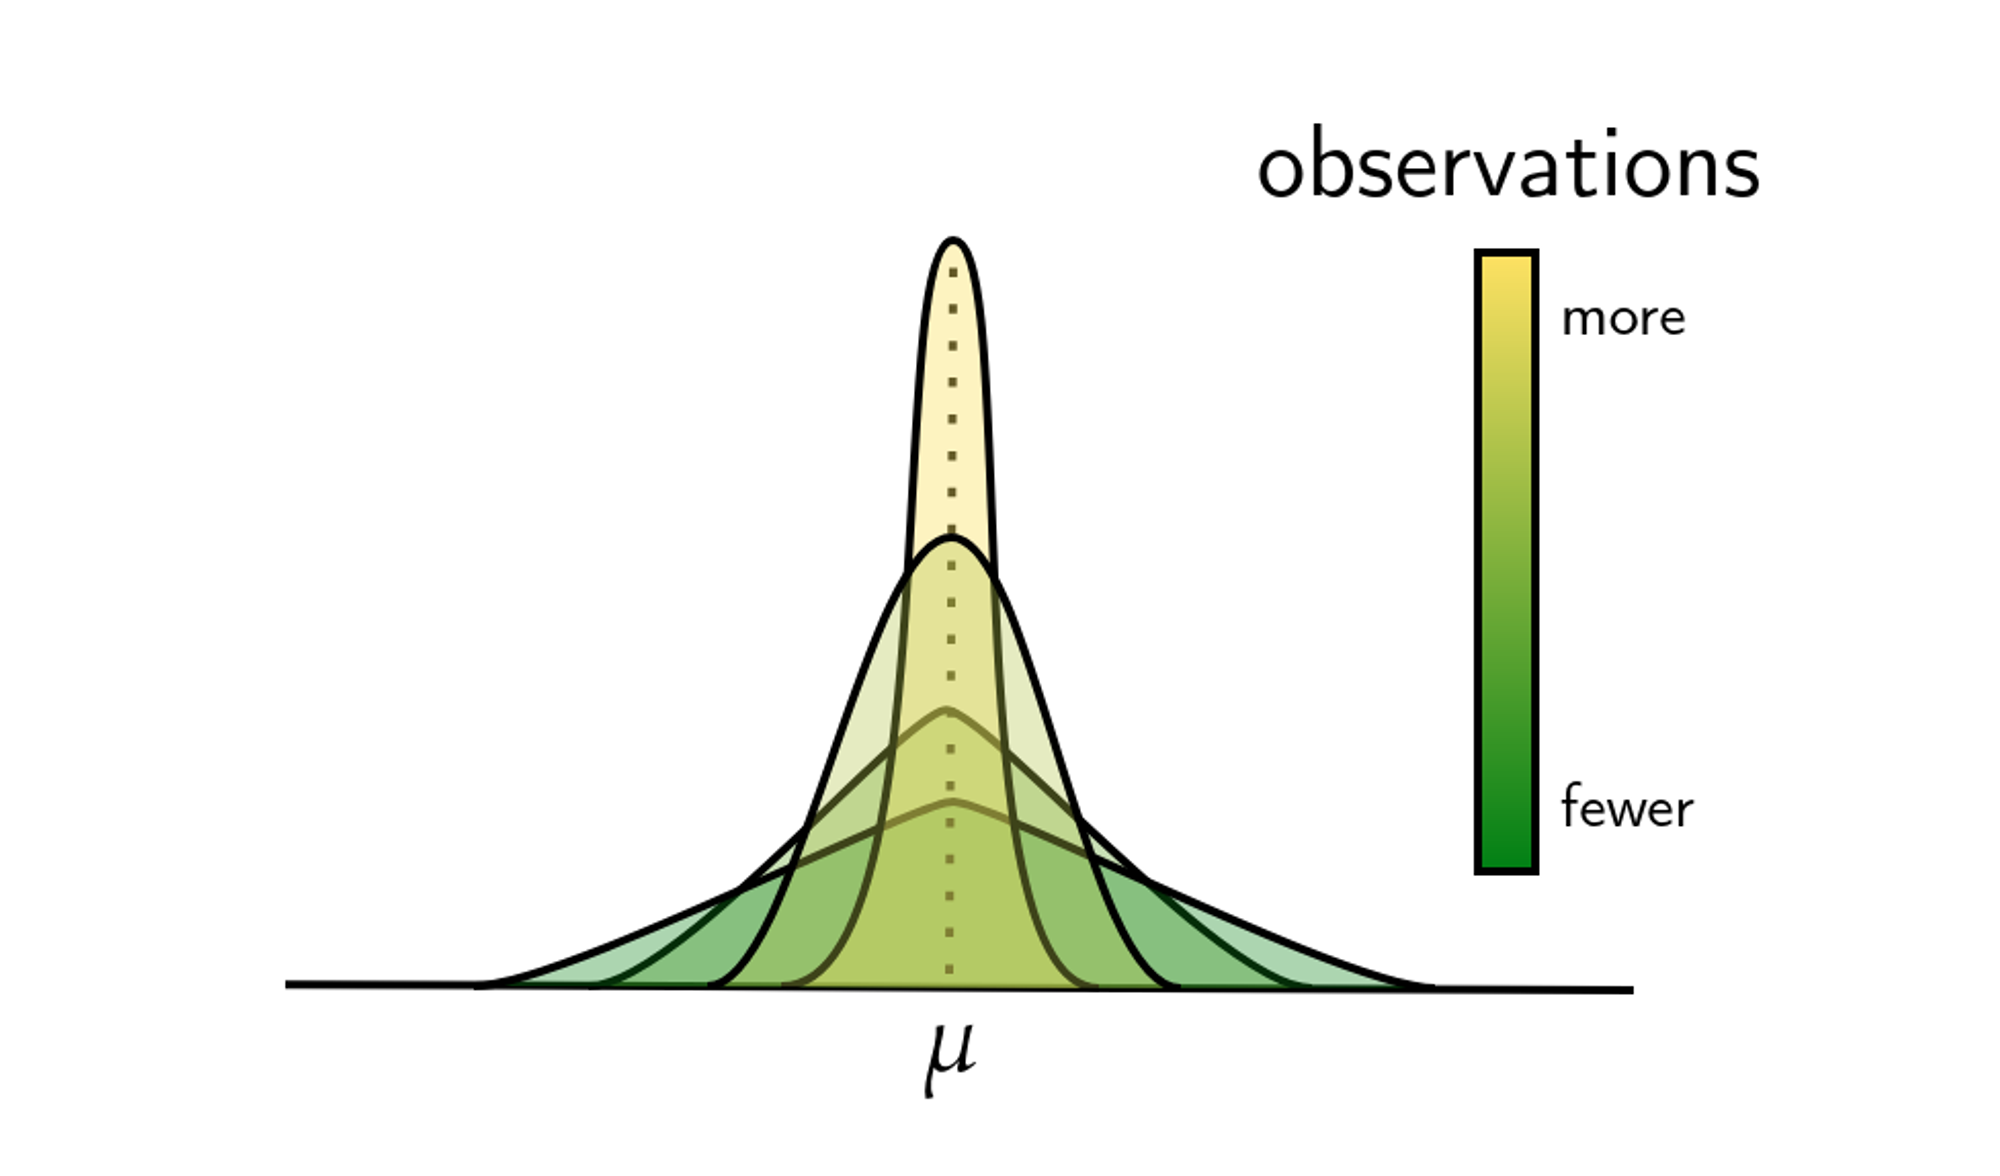 Figure 4. For an estimator that is both unbiased and consistent, when the number of observations used increases, the distribution of resulting estimates will grow tighter around the true value, as visualized here. This is the case for the proportional (aka nLine) estimator, whose SAIDI estimates will be ever more tightly distributed around the true SAIDI with more observations of customer power reliability.